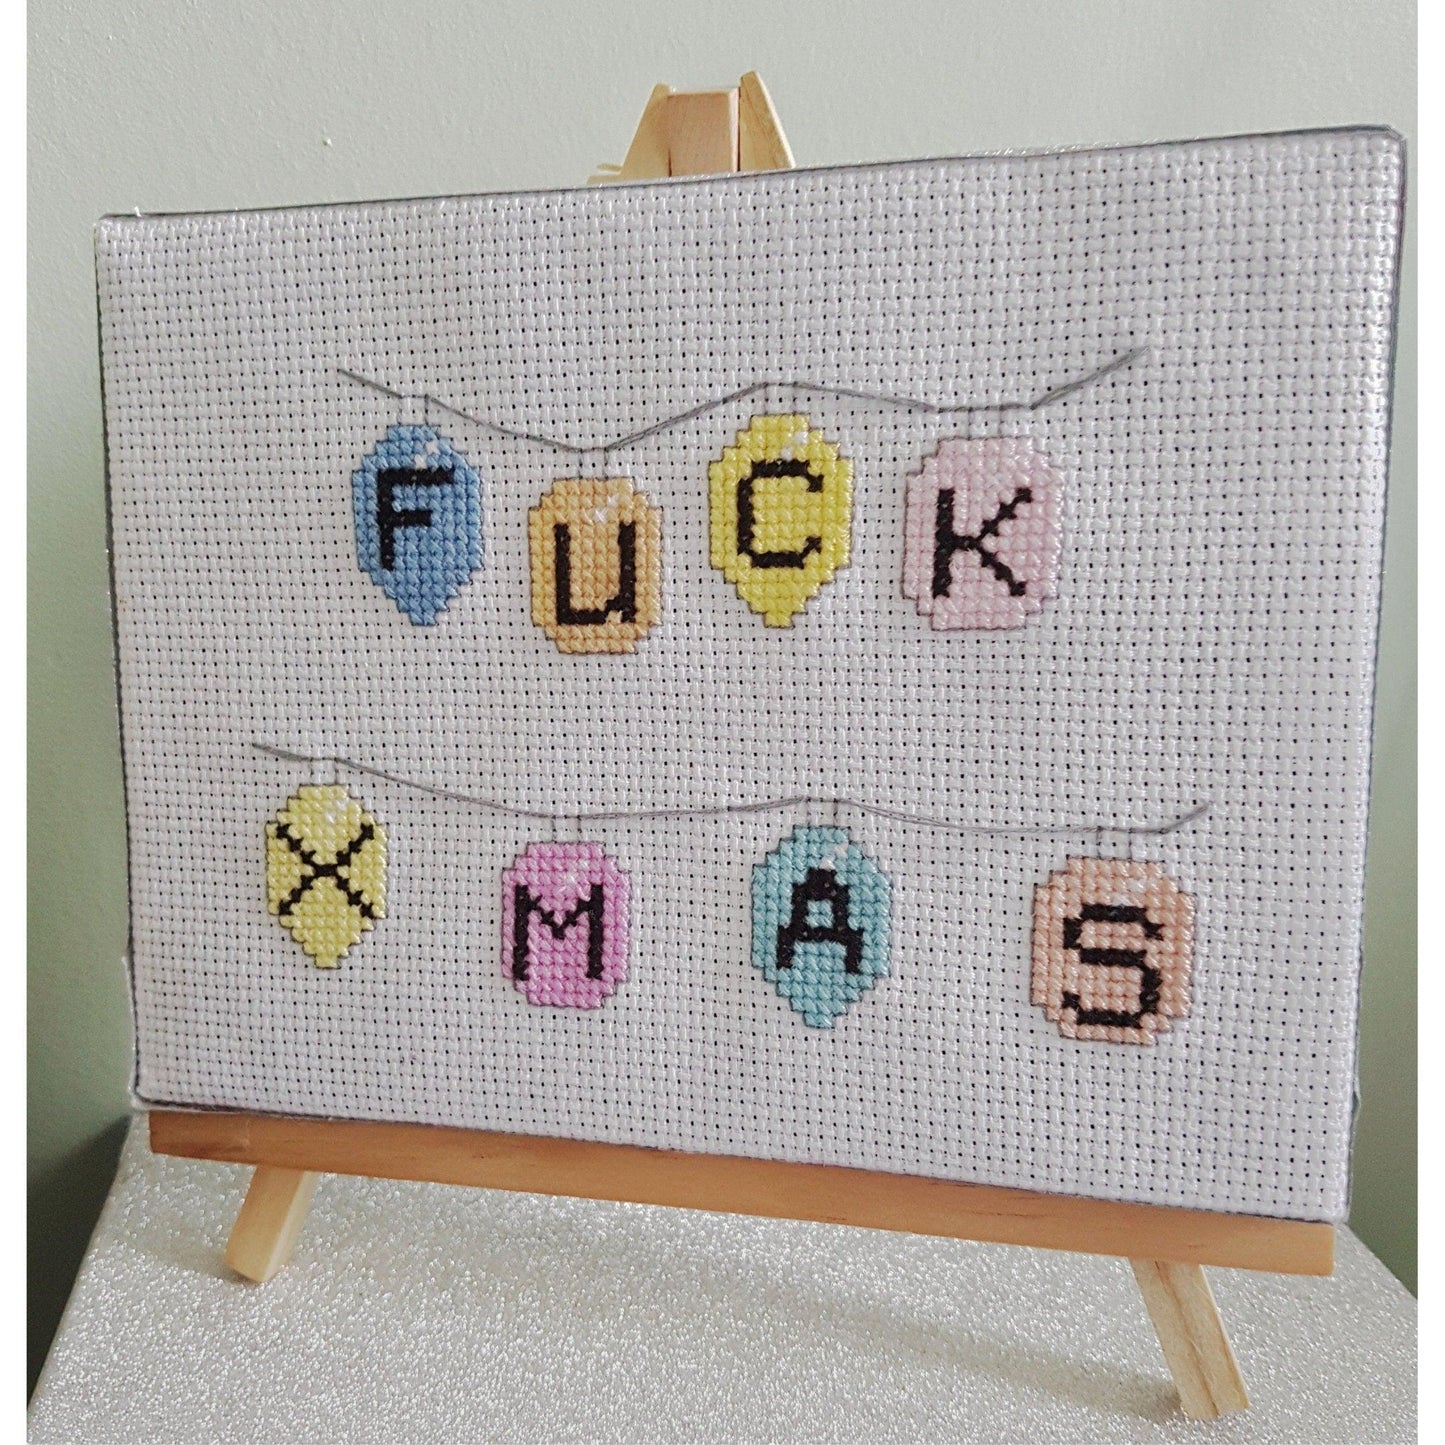 Completed cross stitch on canvas and easel with the words 'Fuck Xmas'